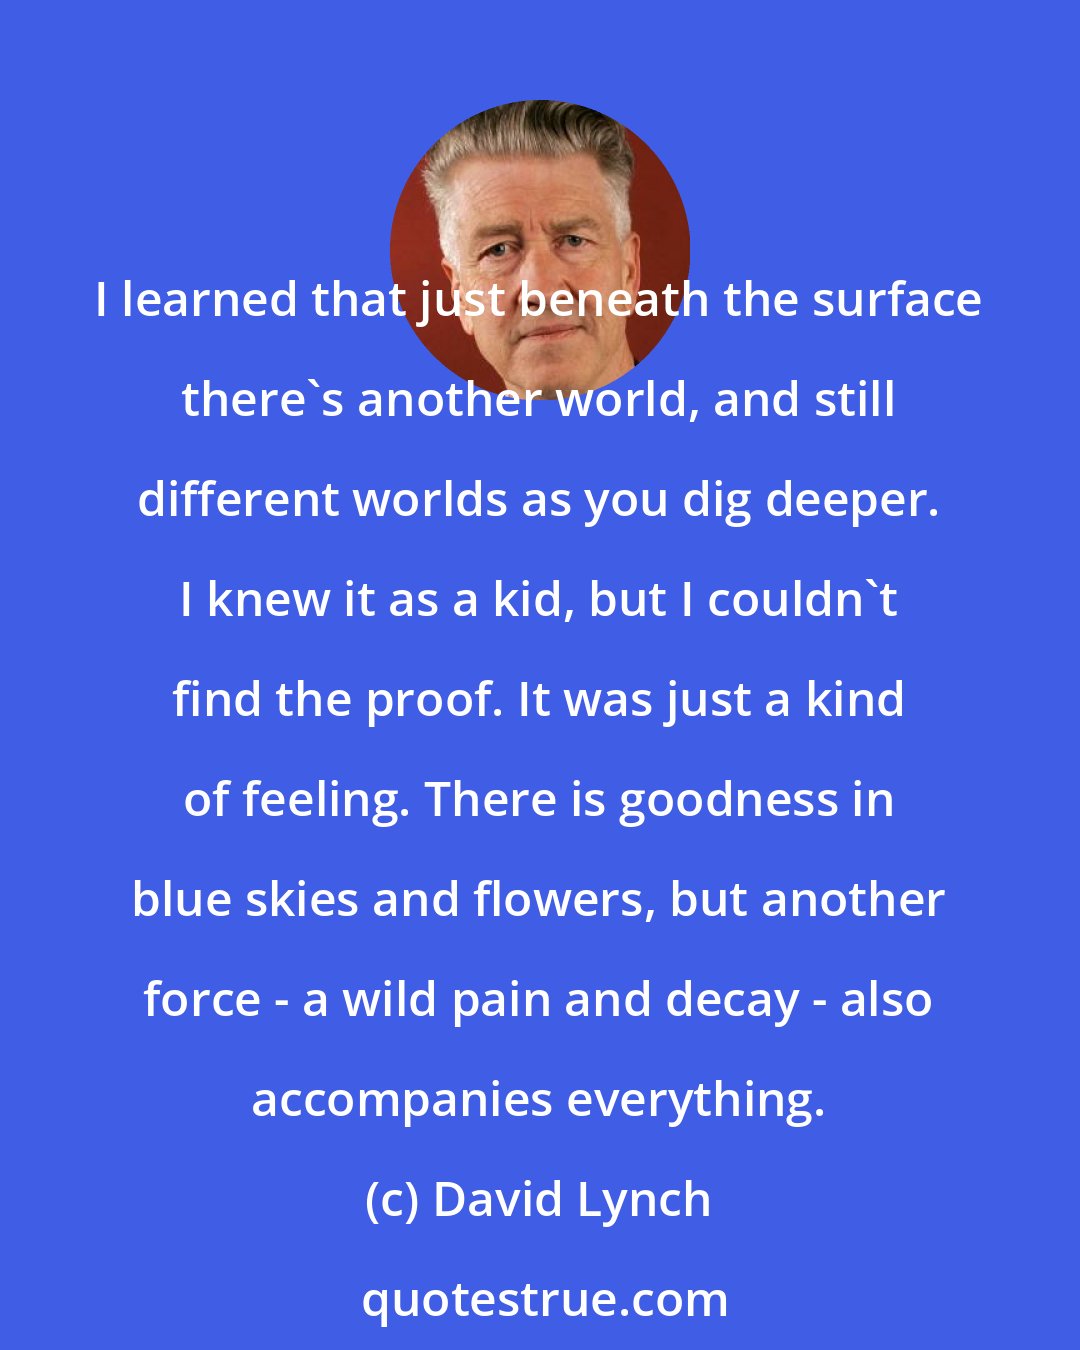 David Lynch: I learned that just beneath the surface there's another world, and still different worlds as you dig deeper. I knew it as a kid, but I couldn't find the proof. It was just a kind of feeling. There is goodness in blue skies and flowers, but another force - a wild pain and decay - also accompanies everything.